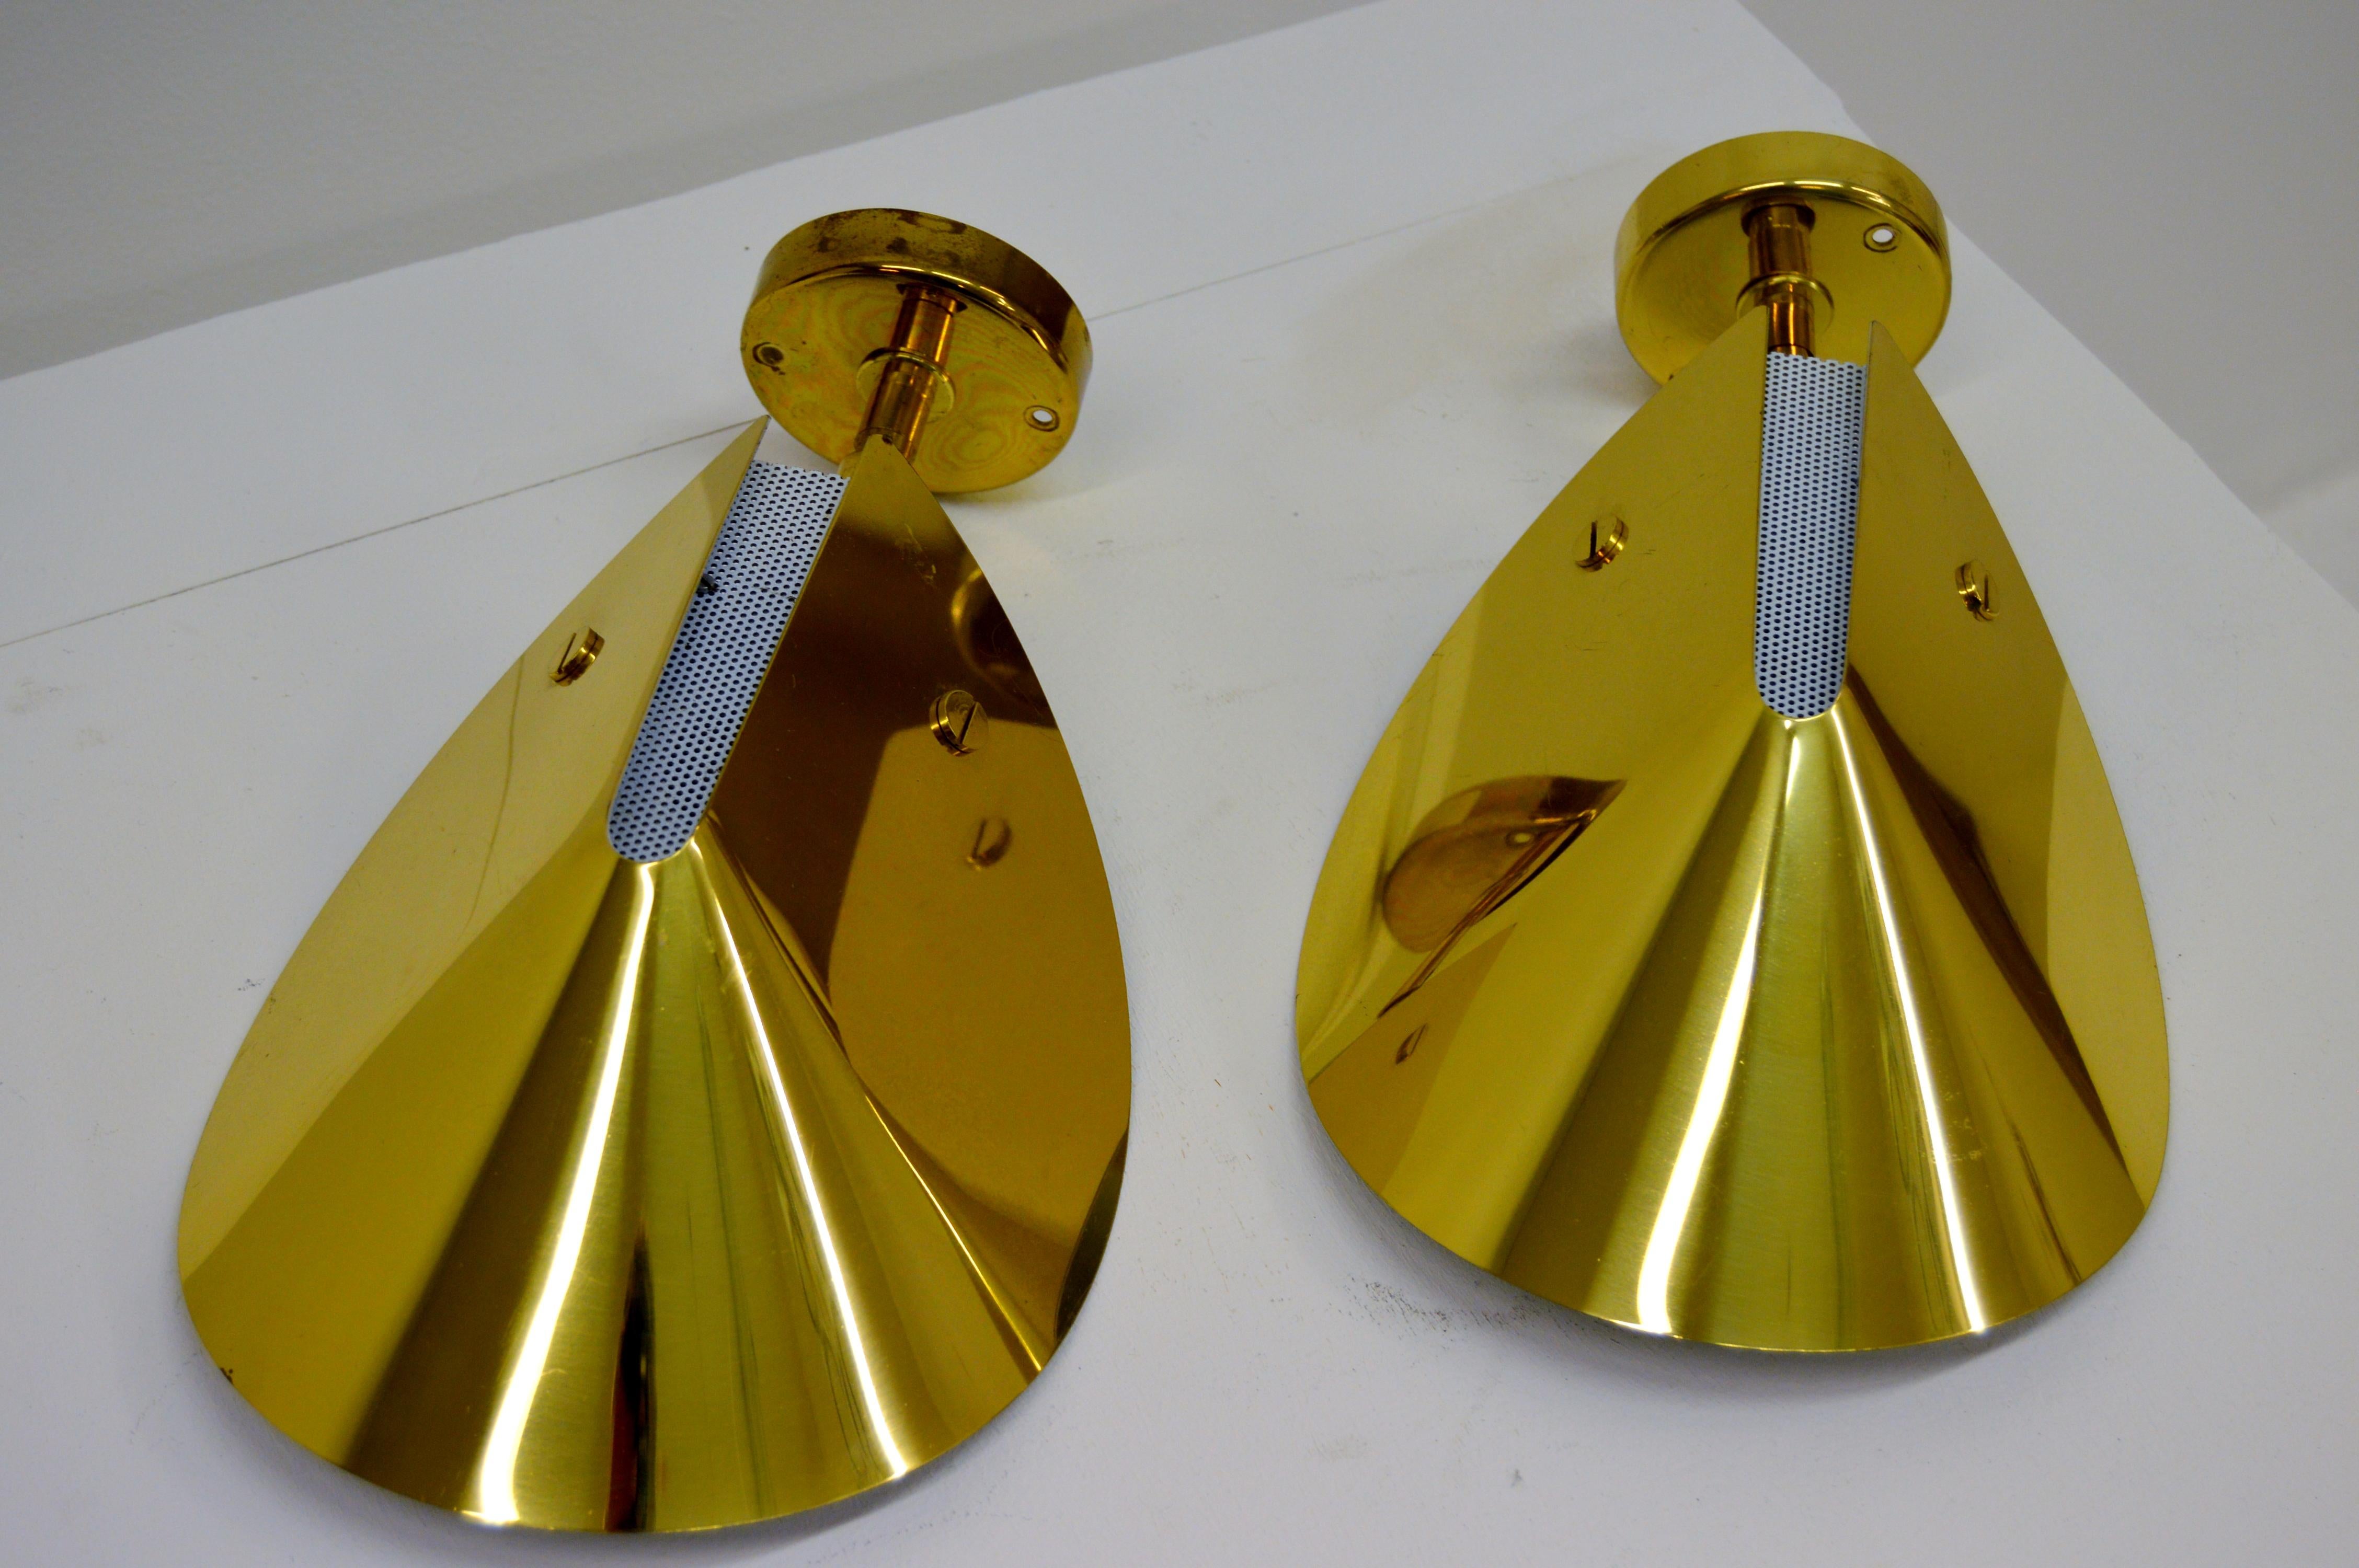 Elegant multi functional brass wall scones. Adjustable angle so they can reflect the light differently. Unknown designer, produced by Aneta Belysning, Sweden.

 